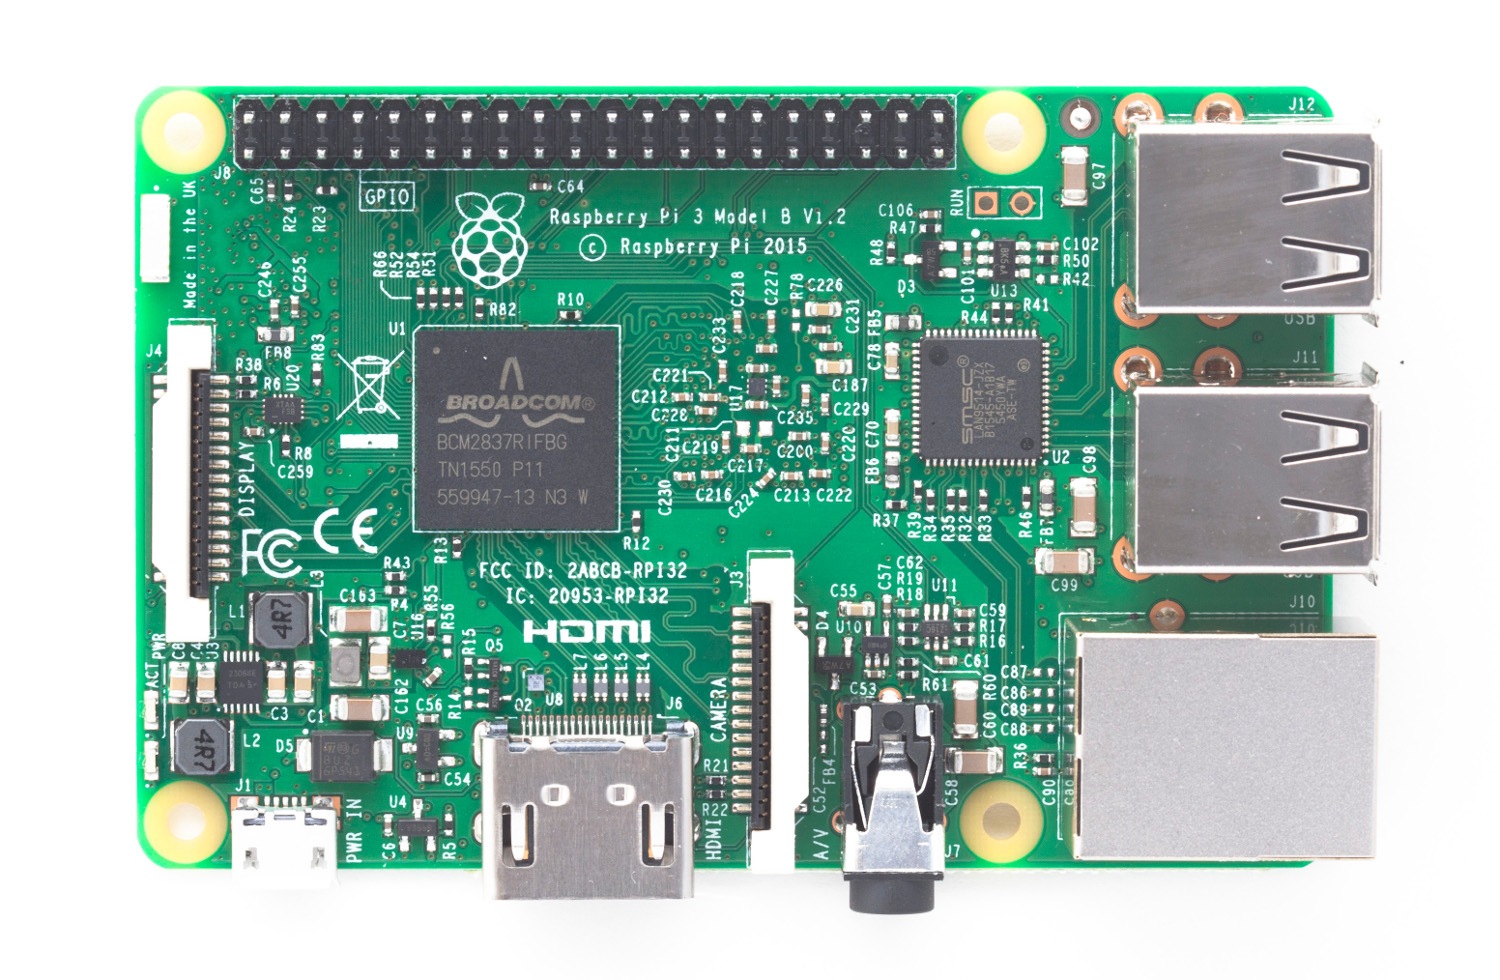 Raspberry Pi Home Server - Part 1 - What is it and what can it do?